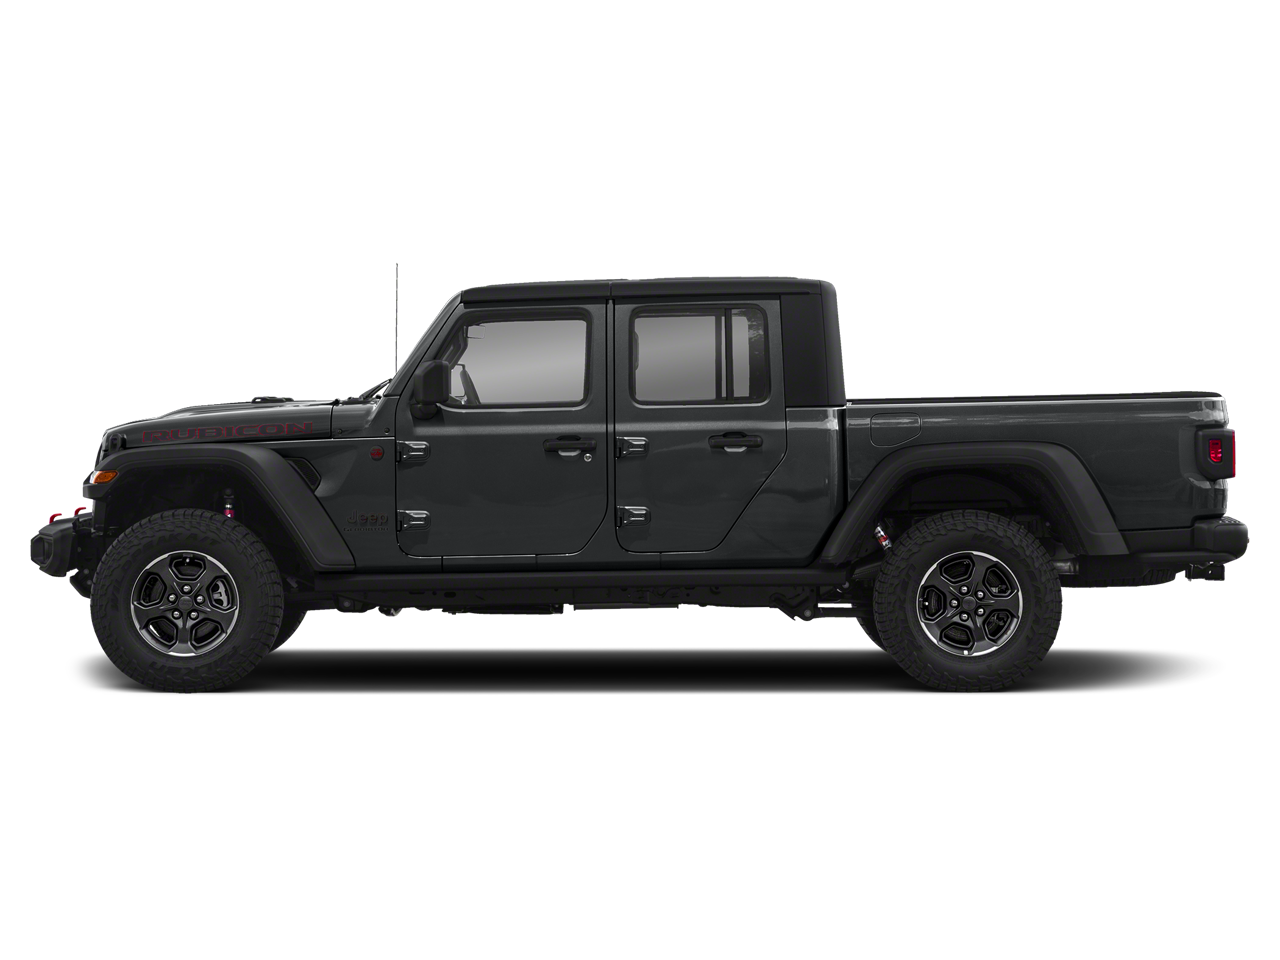 2020 Jeep Gladiator Rubicon w/Lots of Upgrades!!